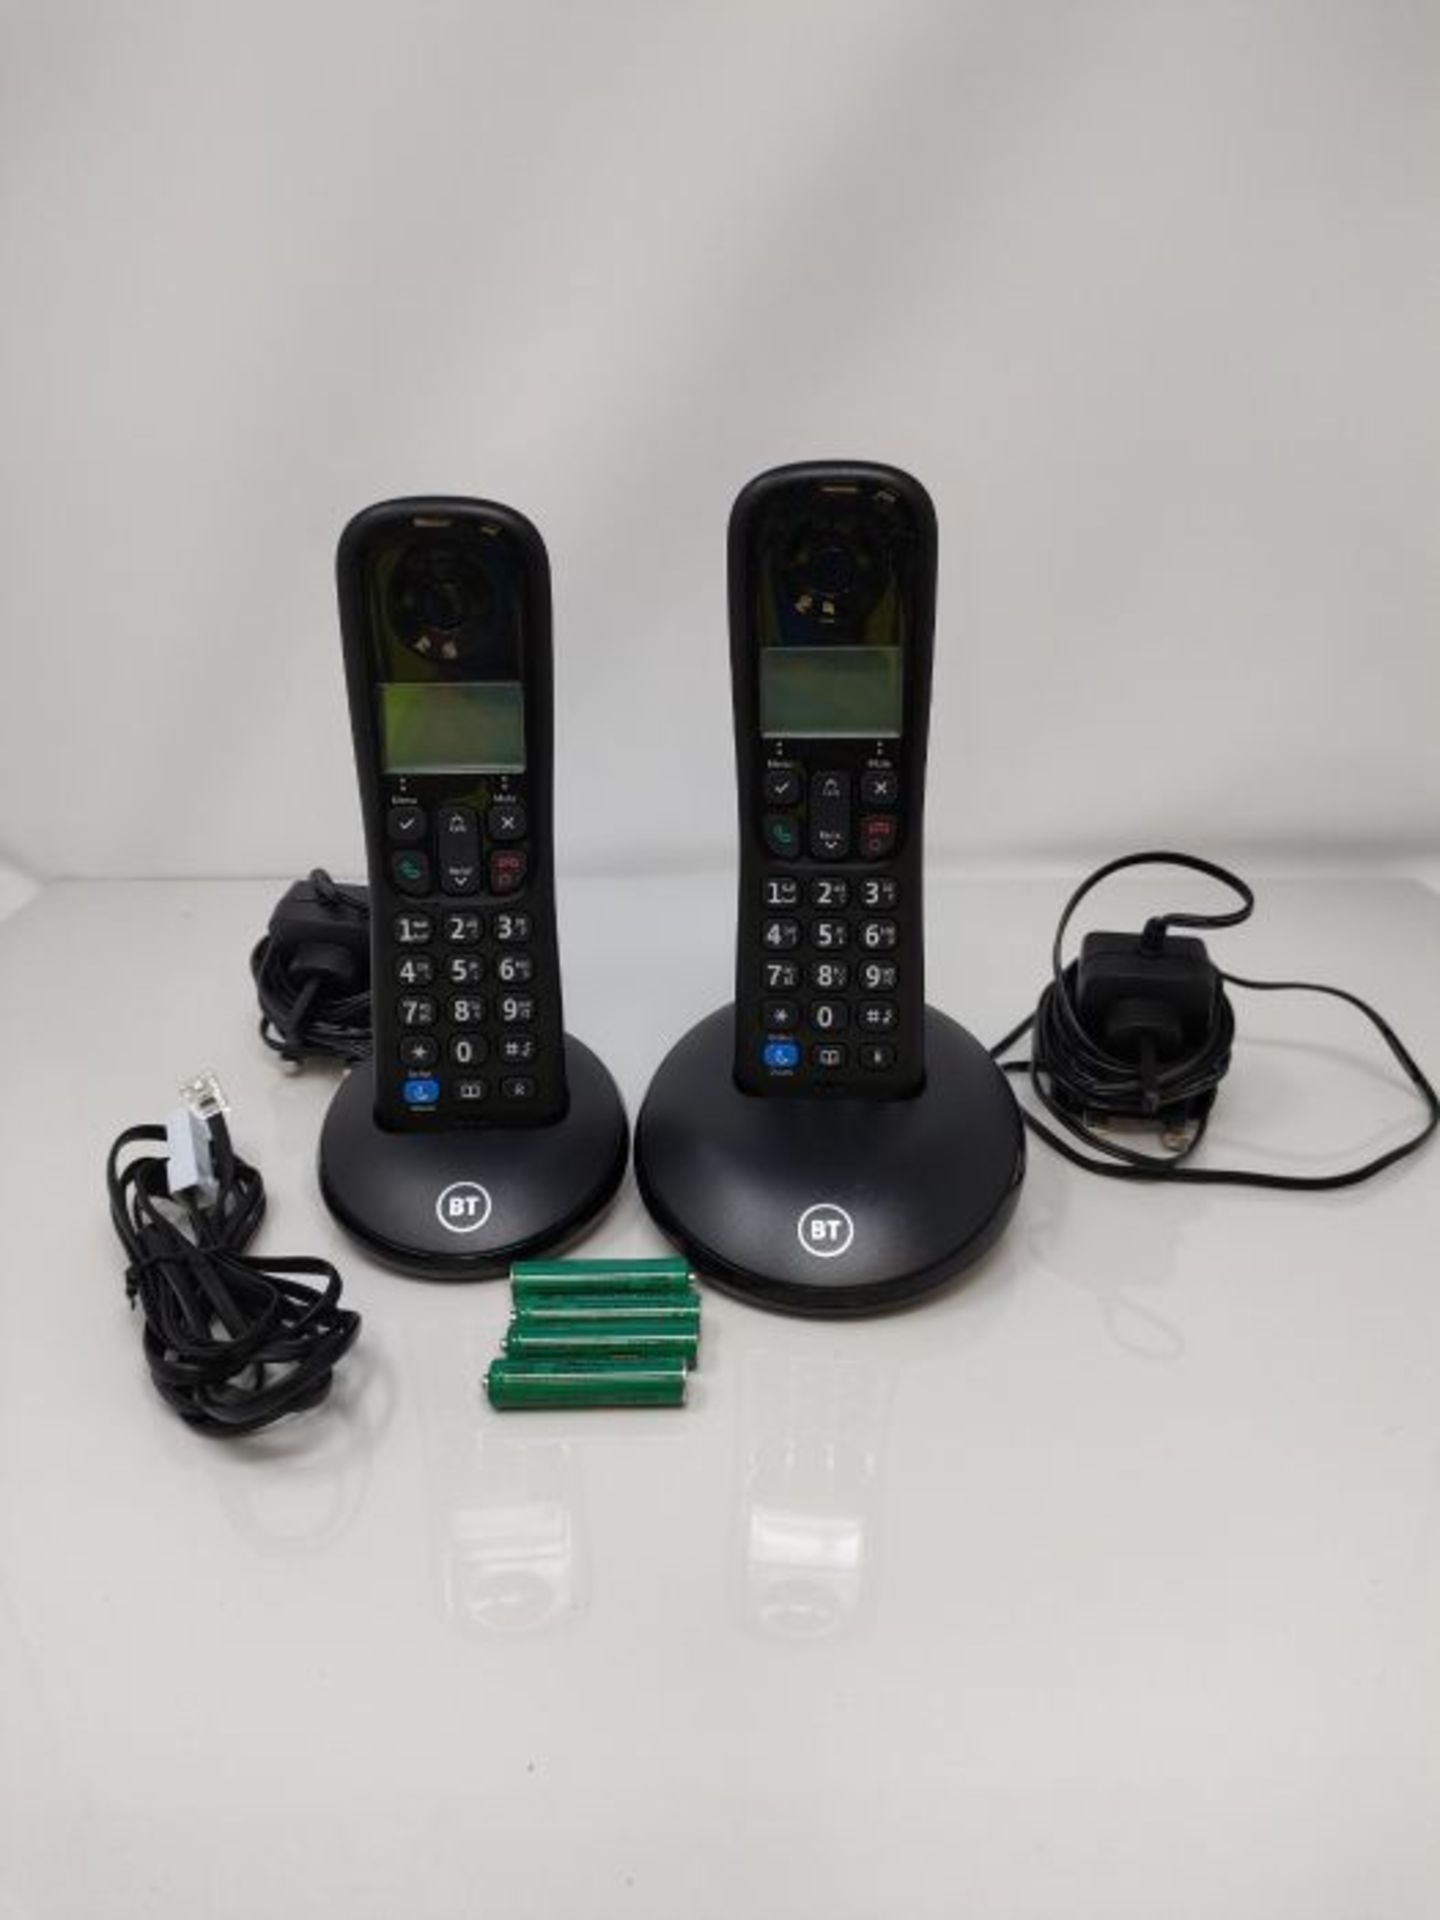 BT Everyday Cordless Home Phone with Basic Call Blocking, Twin Handset Pack, Black - Image 3 of 3